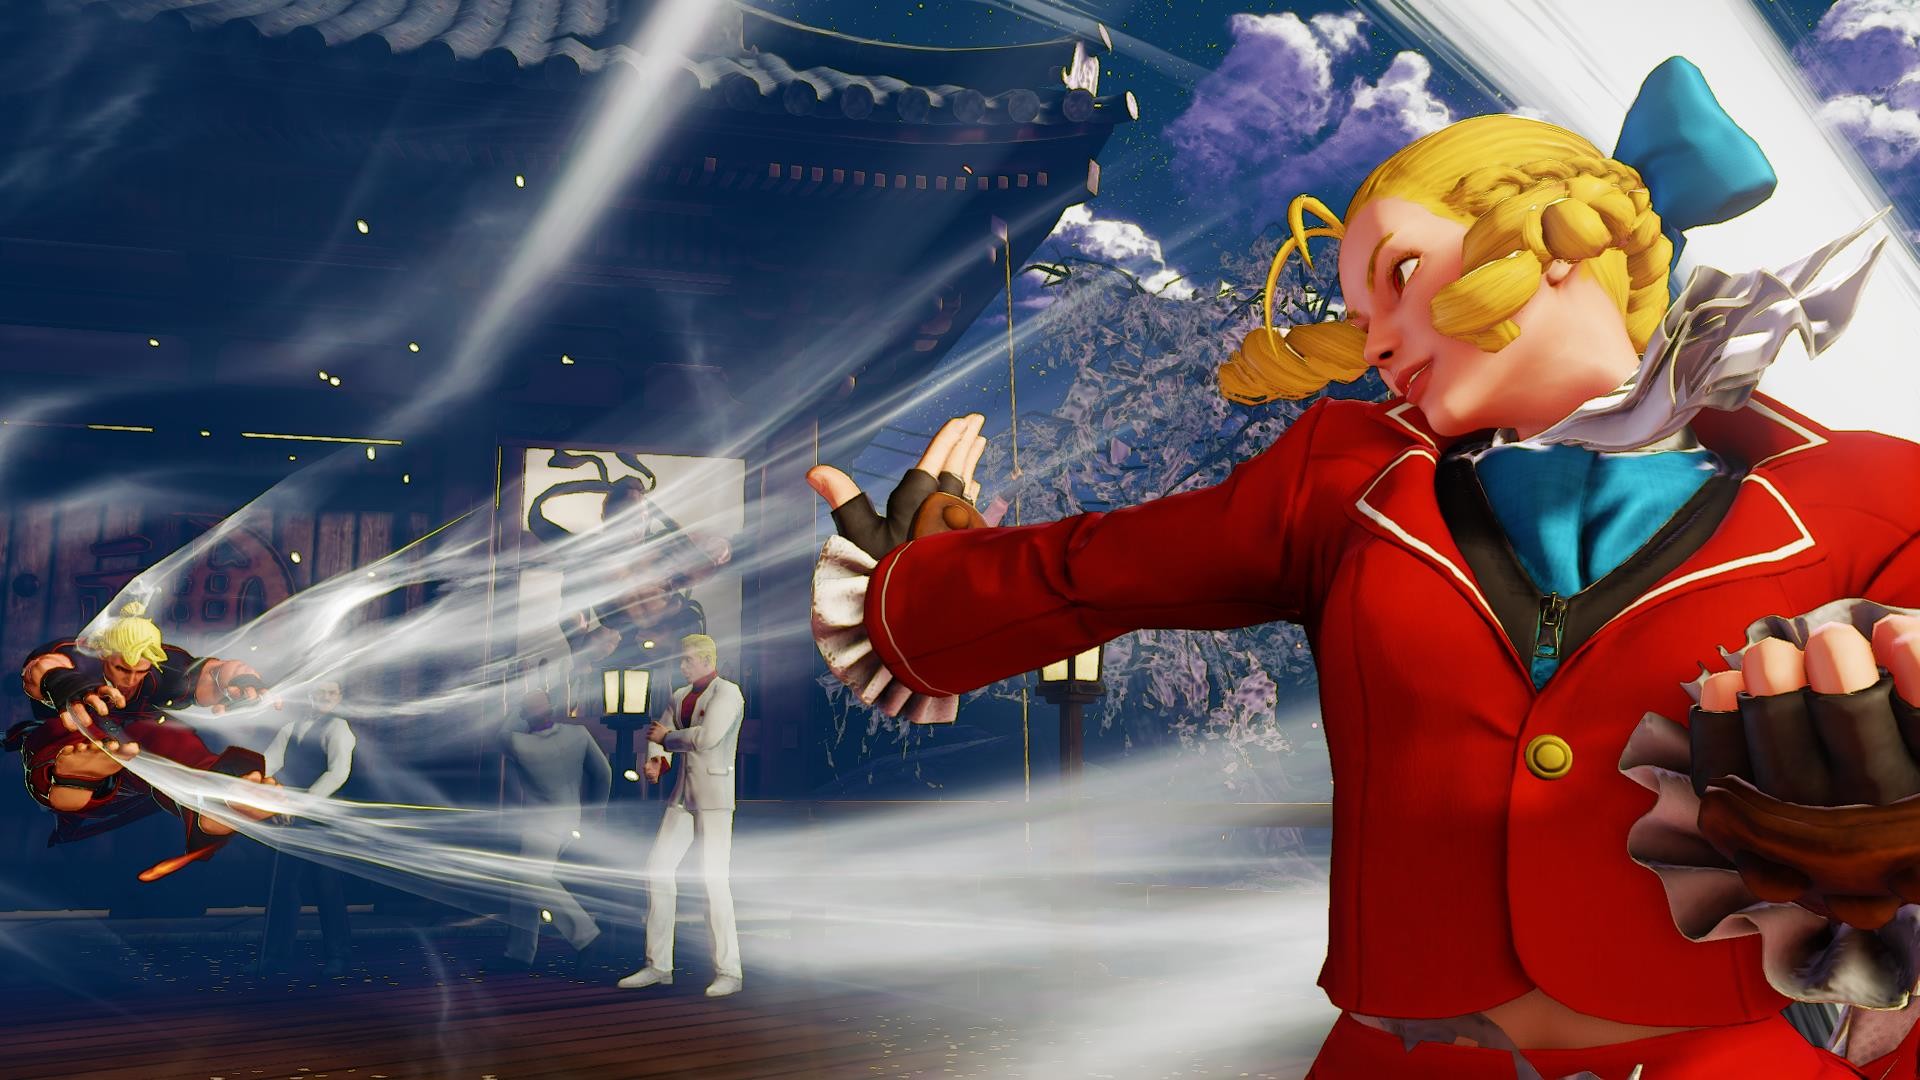 1920x1080 Karin confirmed for Street Fighter 5, watch her in action .